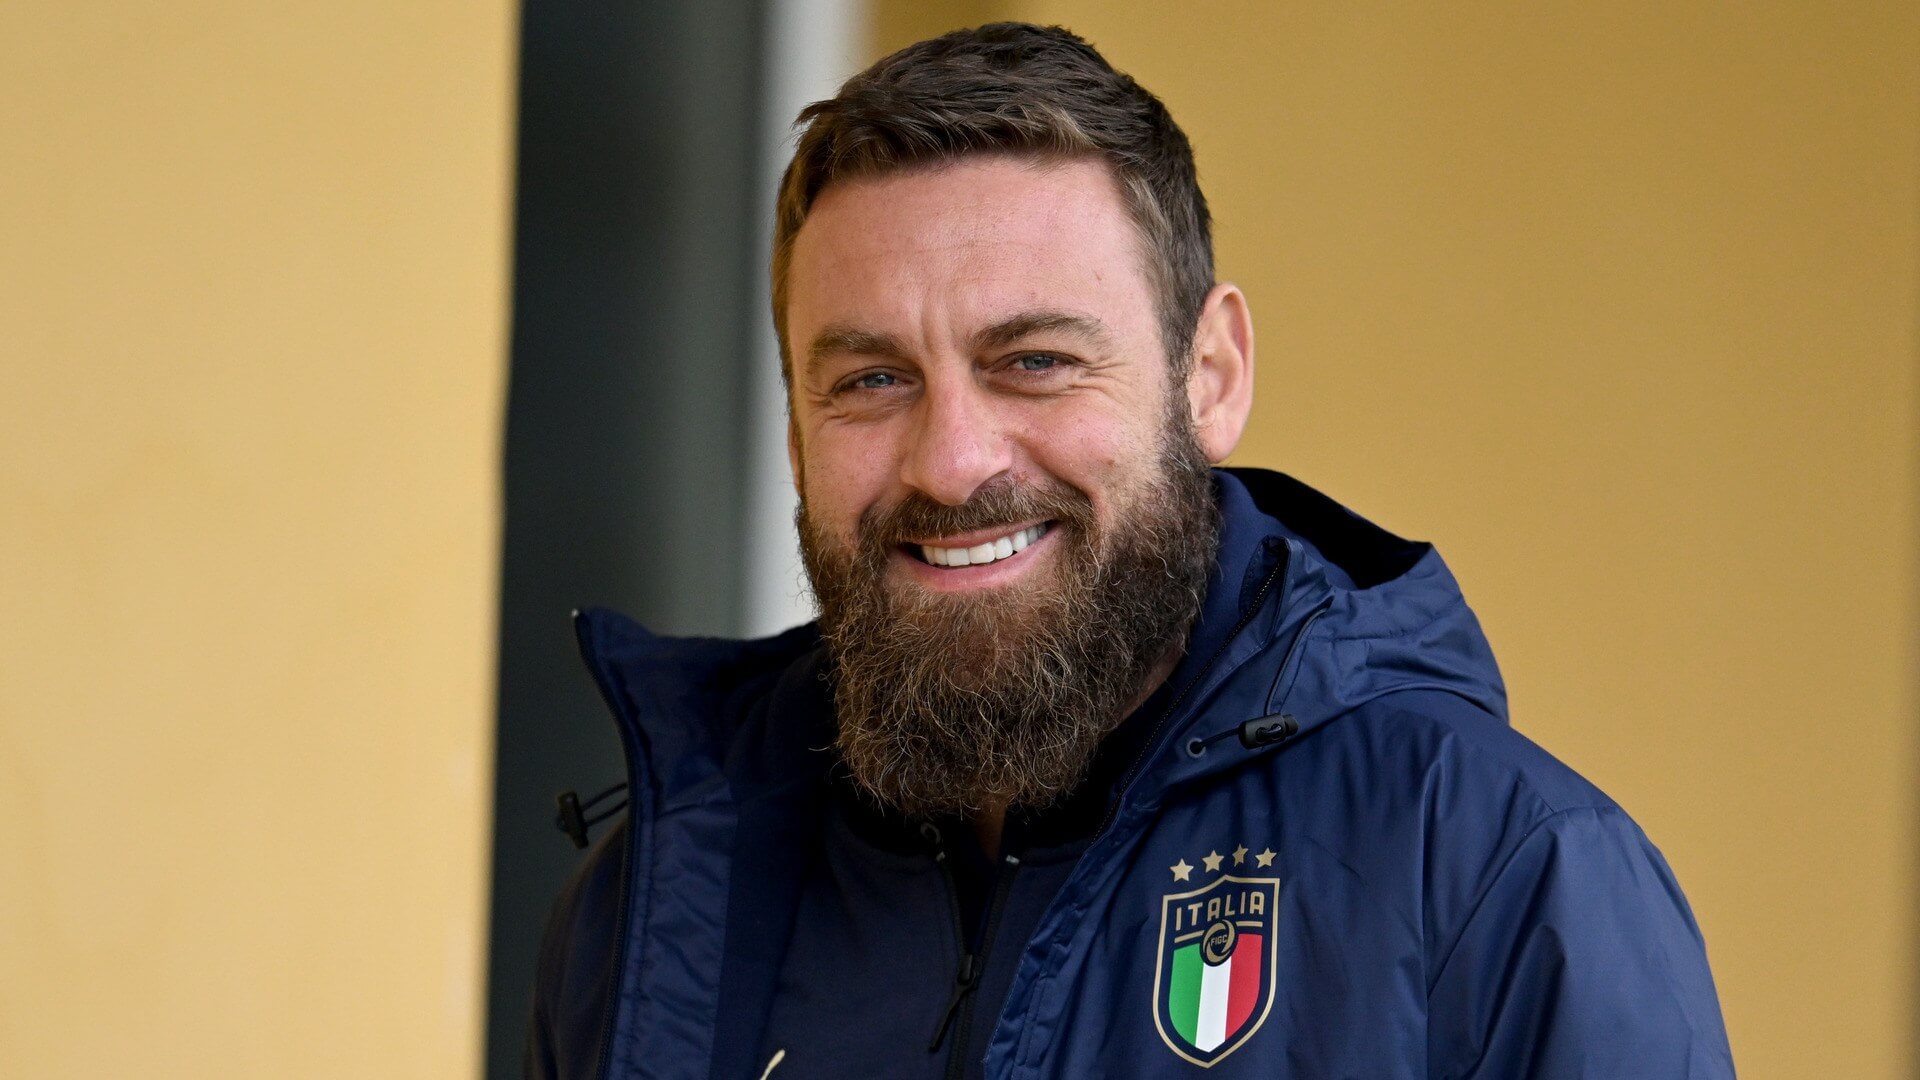 13 Astonishing Facts About Daniele De Rossi - Facts.net